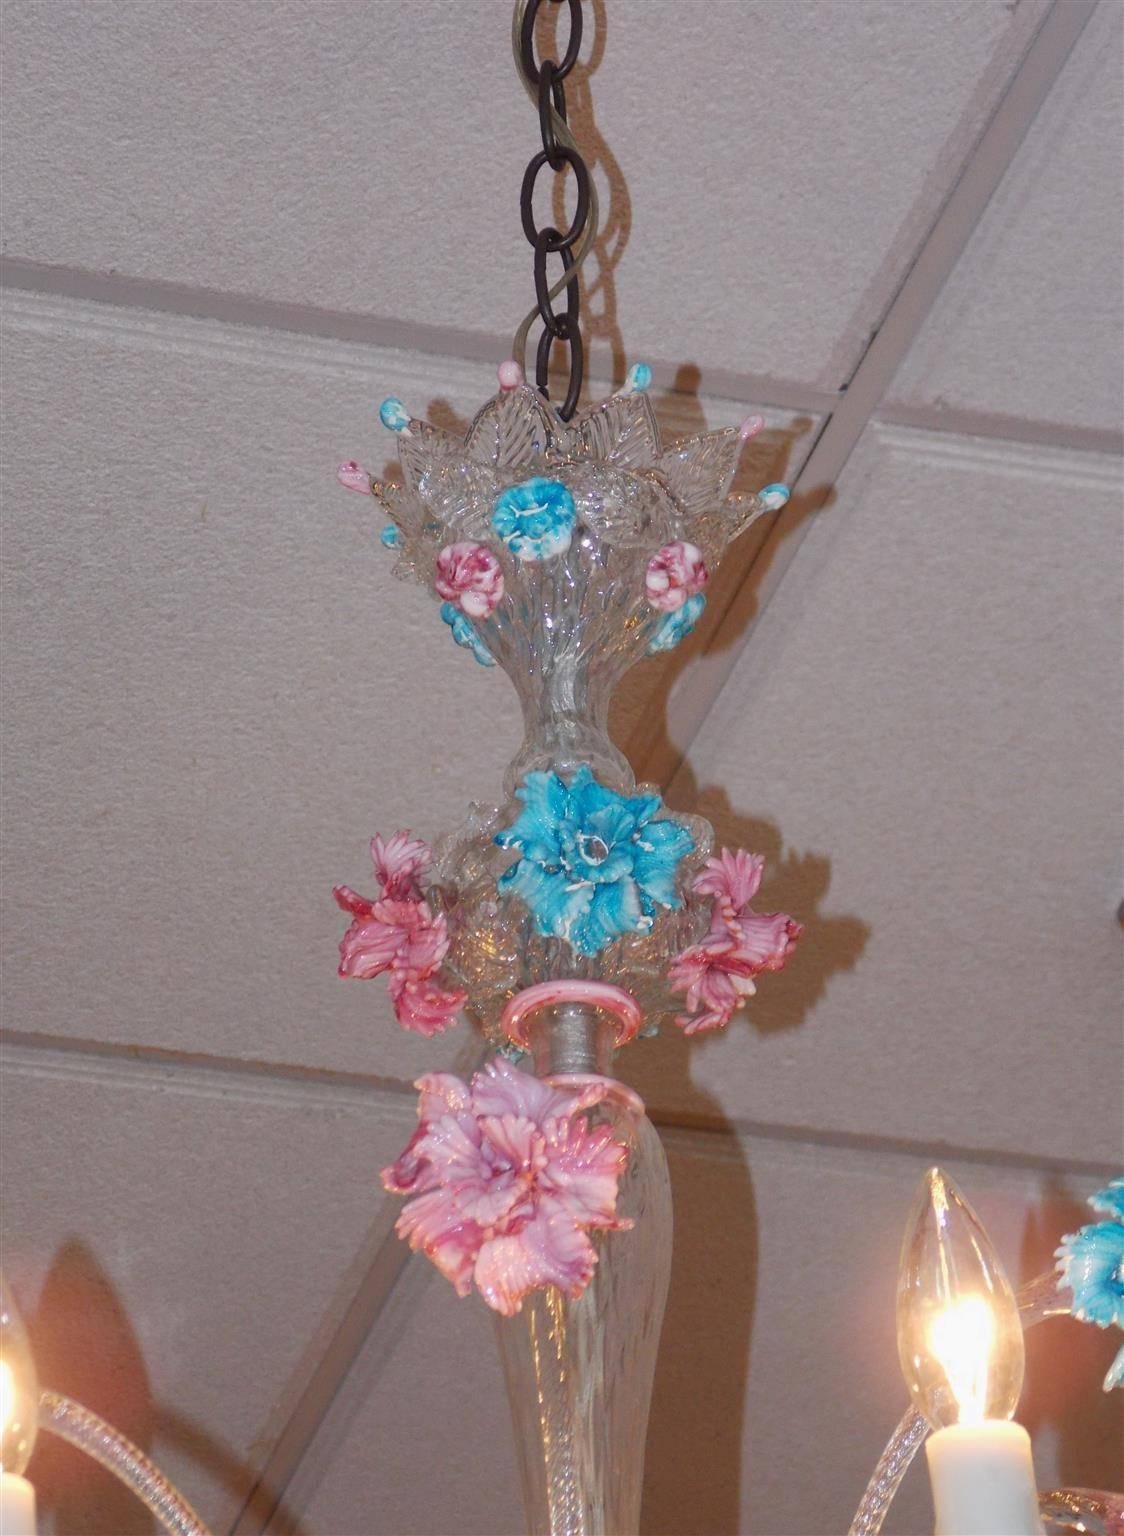 Venetian hand blown Opaline Murano six-light chandelier with vibrant pink and blue floral colors, crown canopy, centered bulbous column, scrolled arms with the original crown bobeches, and finished with a decorative vibrant floral lower pendant.